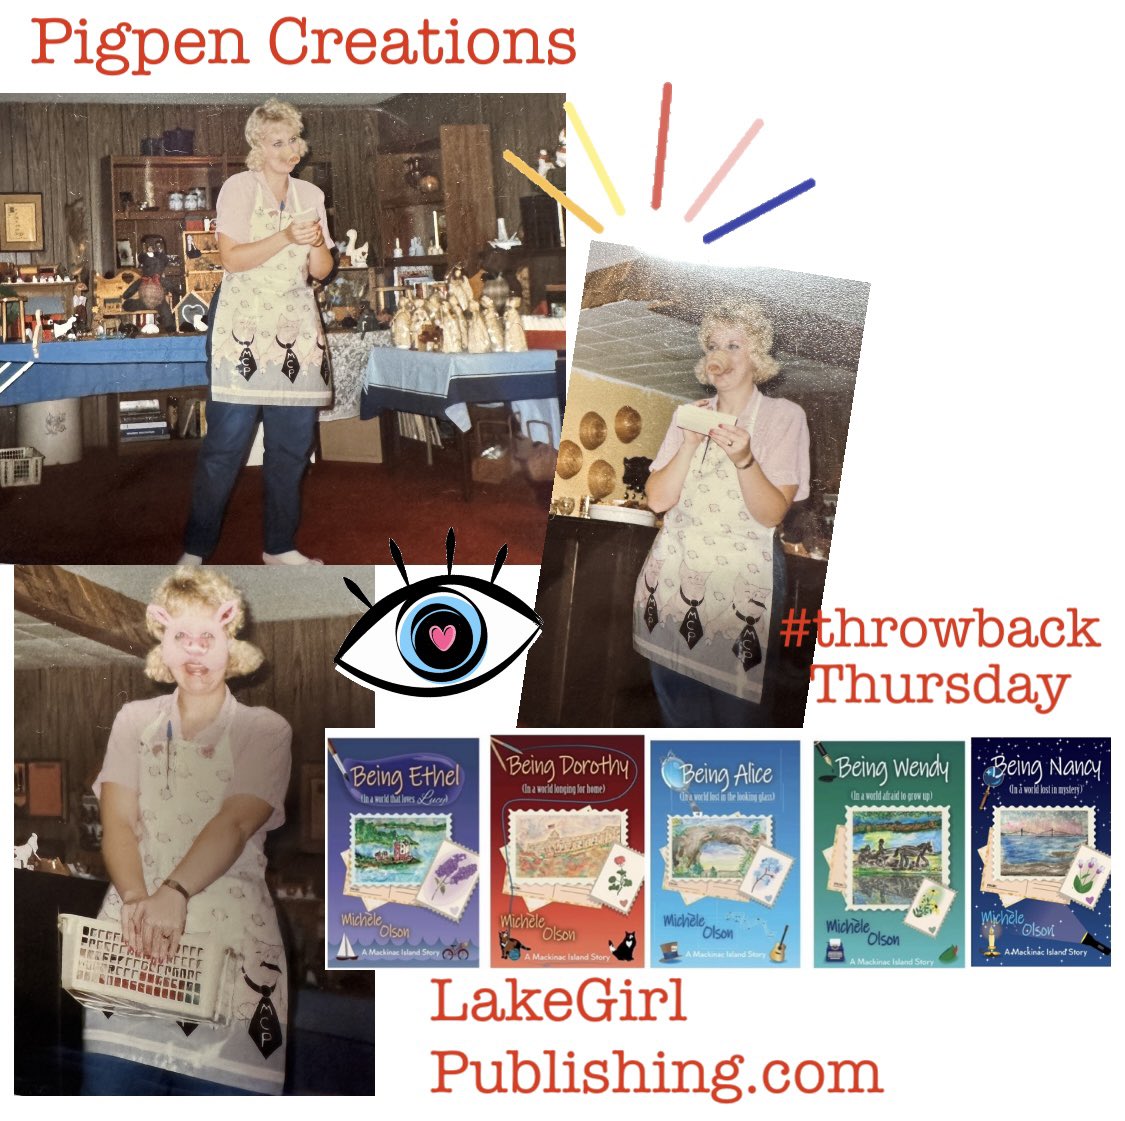 The story of PigPen Creations ! Why does a lady in 1980s do a Tupperware style party that starts with pig comedy? Find out in my latest blog post. It’s a big giggle! shoutout.wix.com/so/69OzUAUye?l… #ThrowbackThursday #beingethelauthor #micheleolson #pigpen #writerslift #WritingCommunity